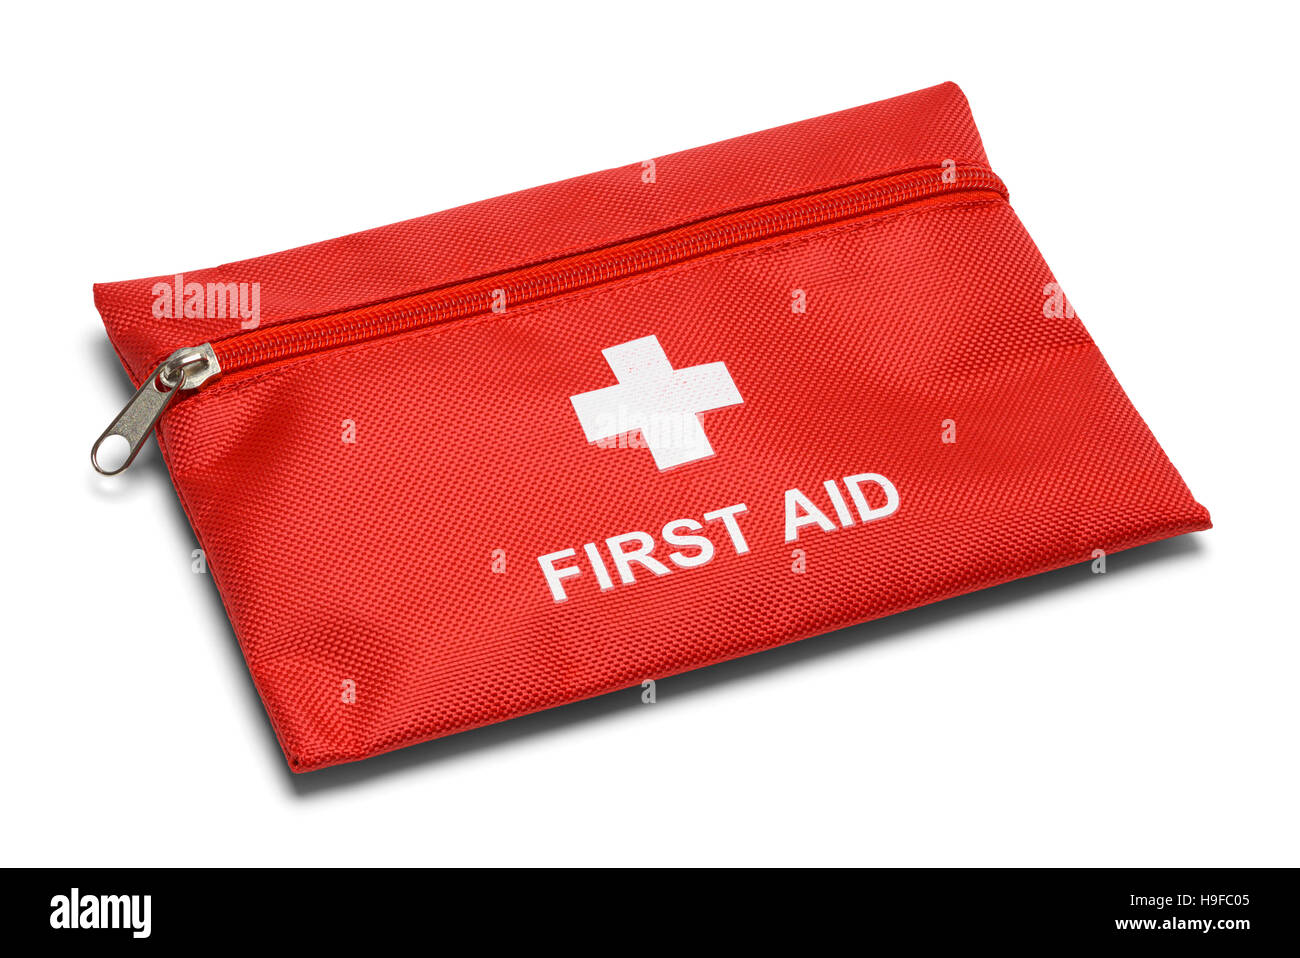 Red First Aid Kit Bag Isolated on White Background. Stock Photo